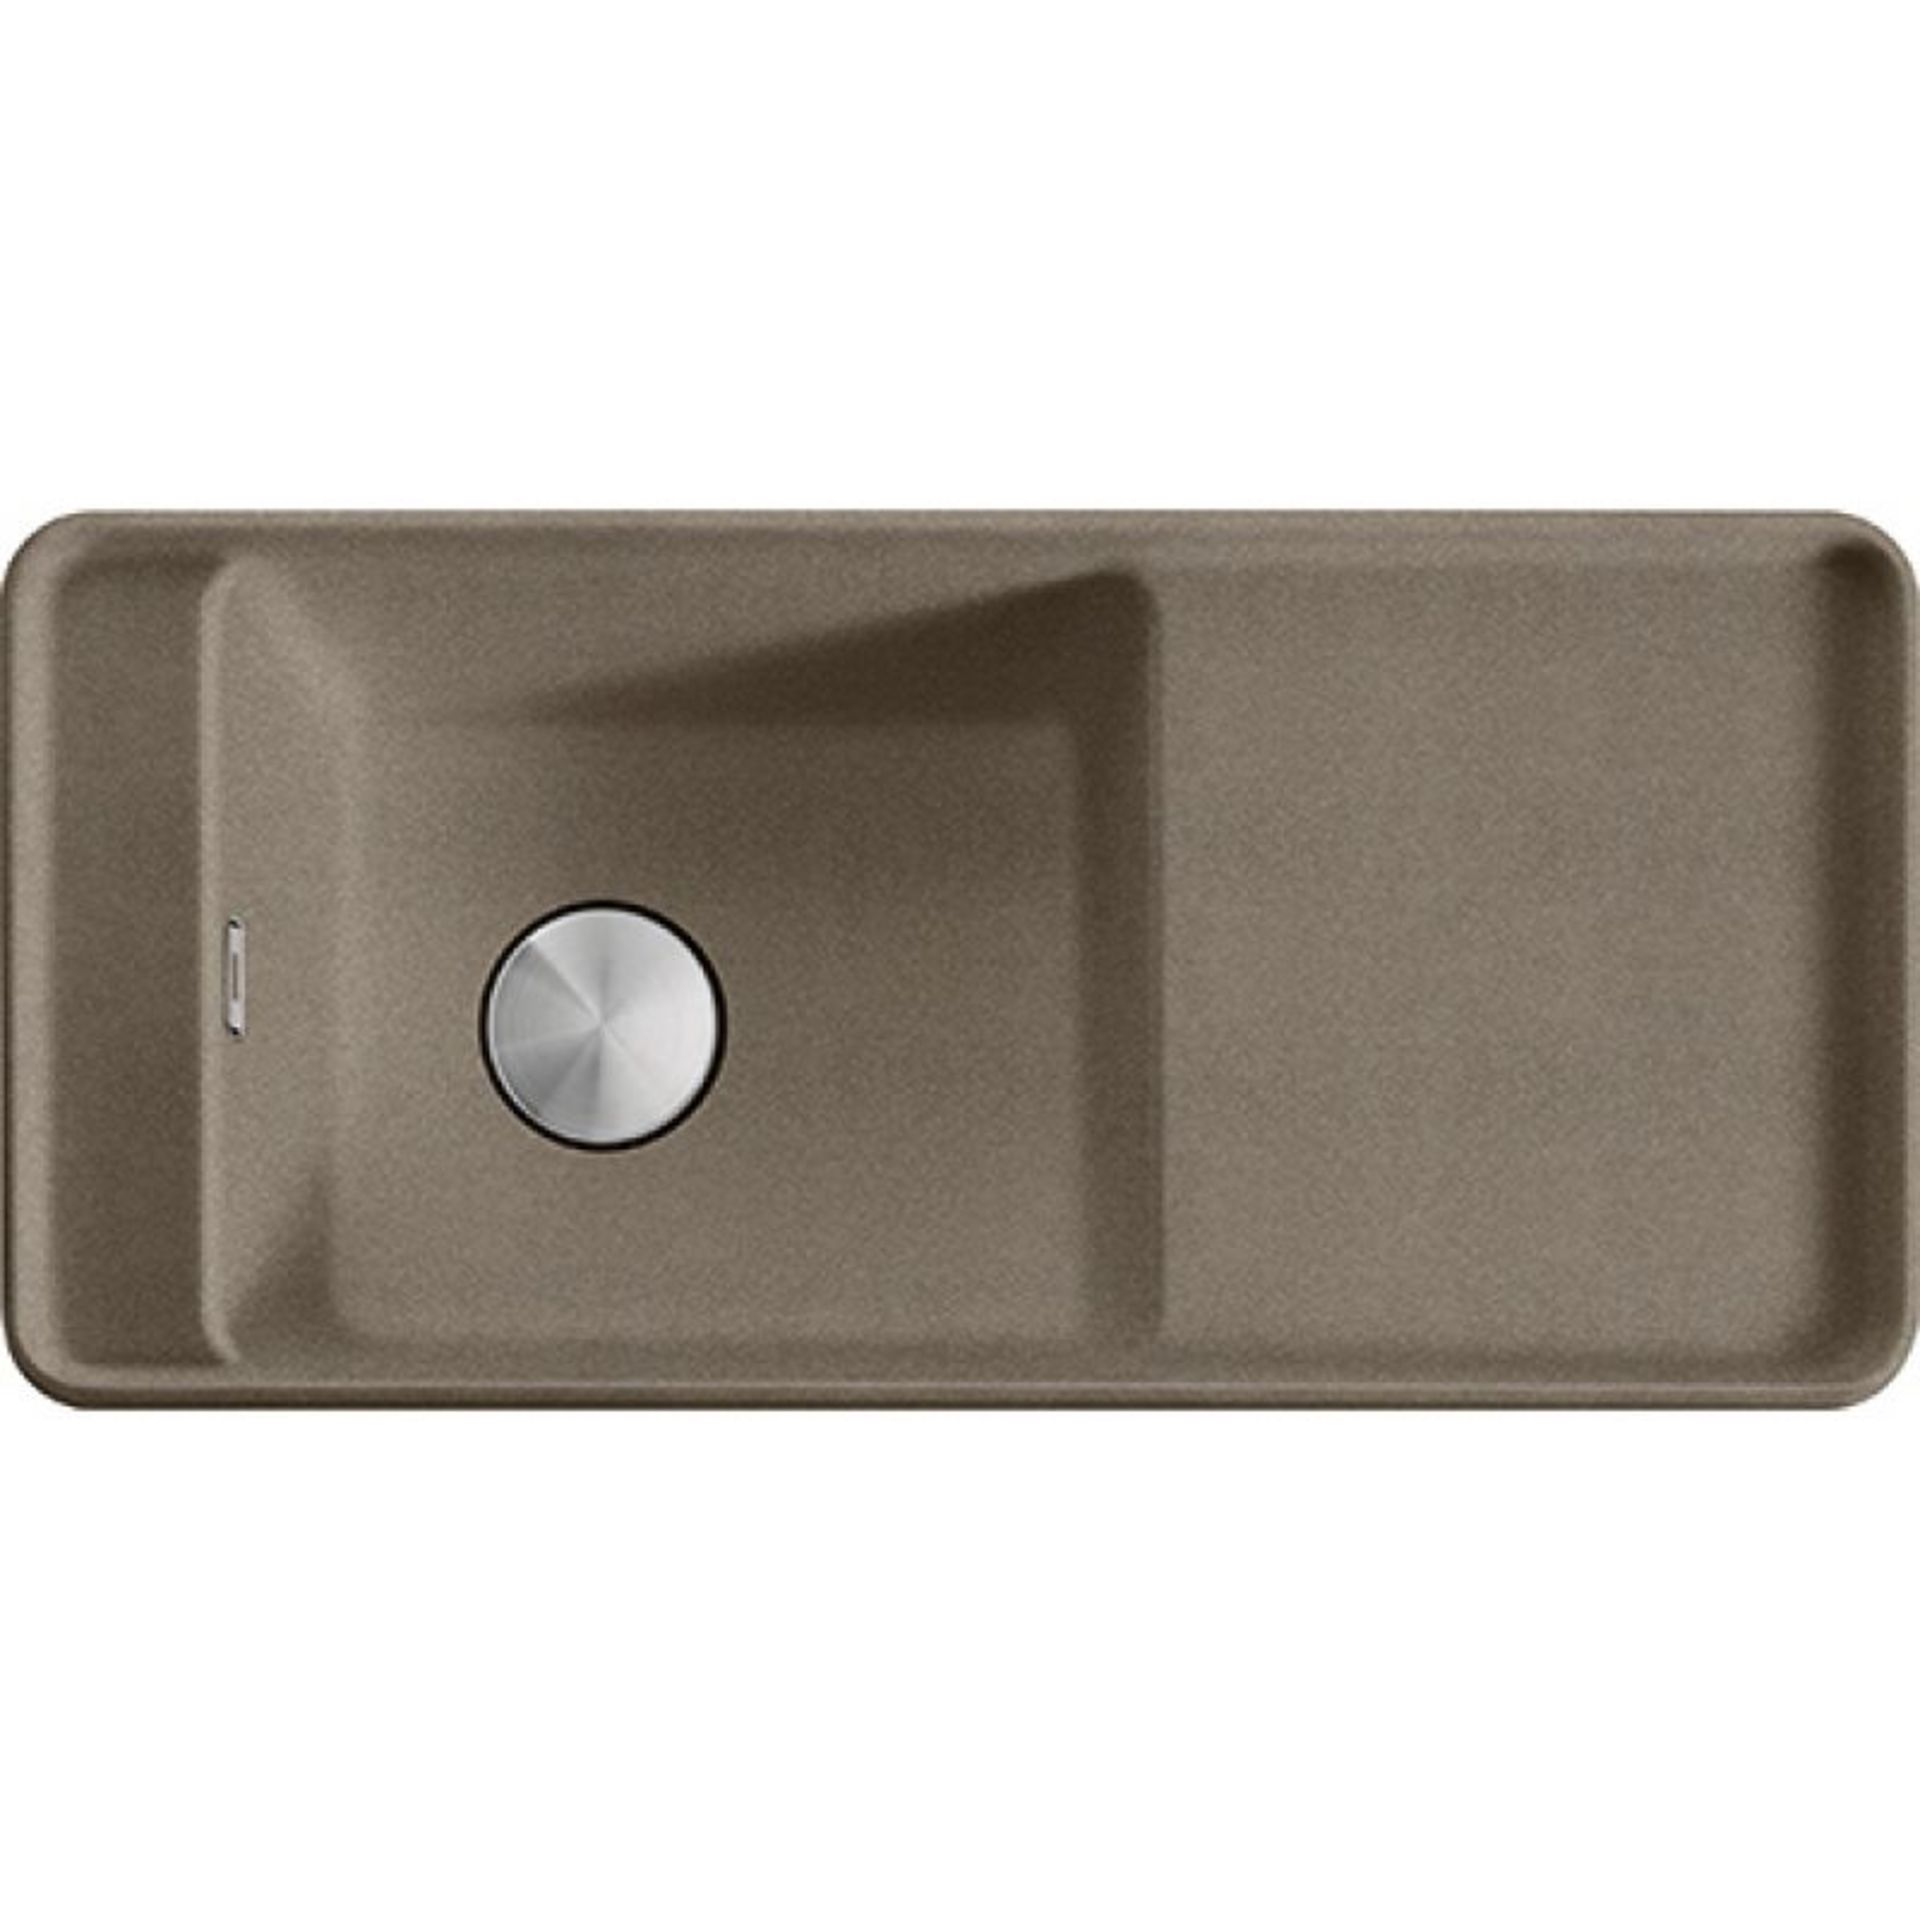 NEW (REF19) 2 x Franke Style Syg611 1b Reversible Inset Kitchen Sink Lunar Grey. RRP £504.89.